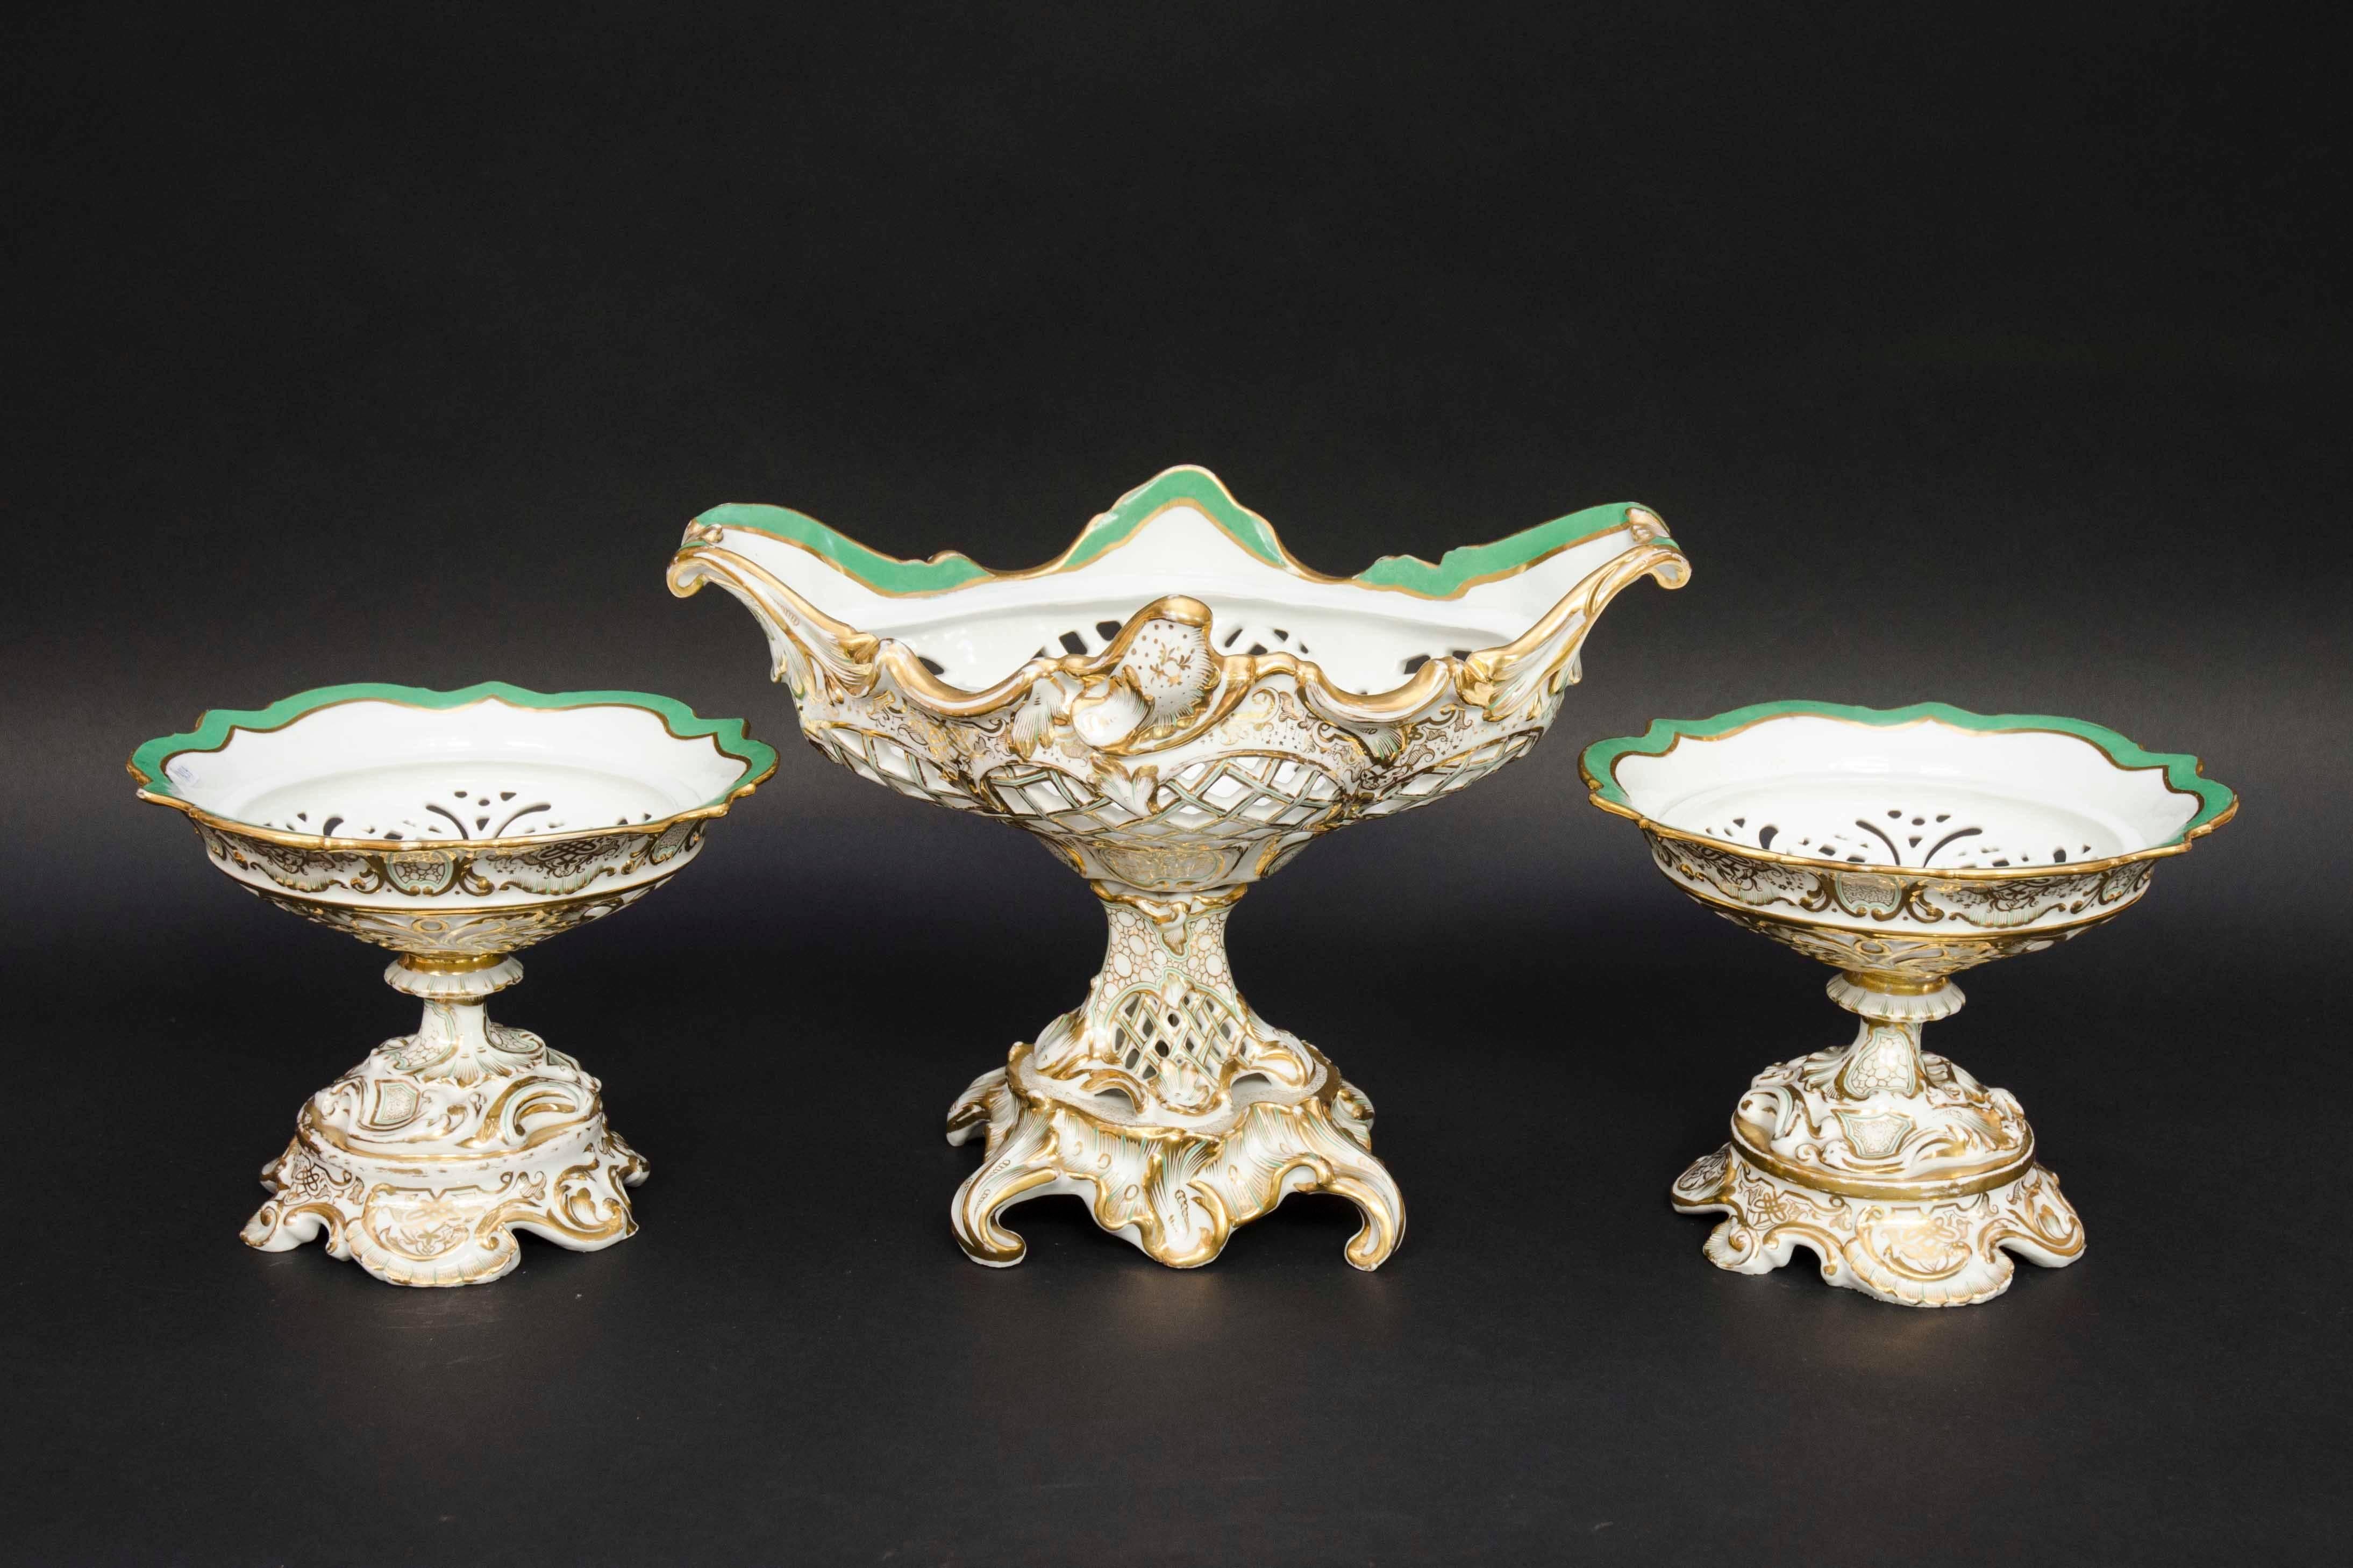 Beautiful mantel garniture of open worked baskets on piedouches in the Rocaille style. Lots of movement in the white porcelain, enhanced with beautiful gildings. Green colored rim inside of the baskets. Signed by the porcelain manufacturer